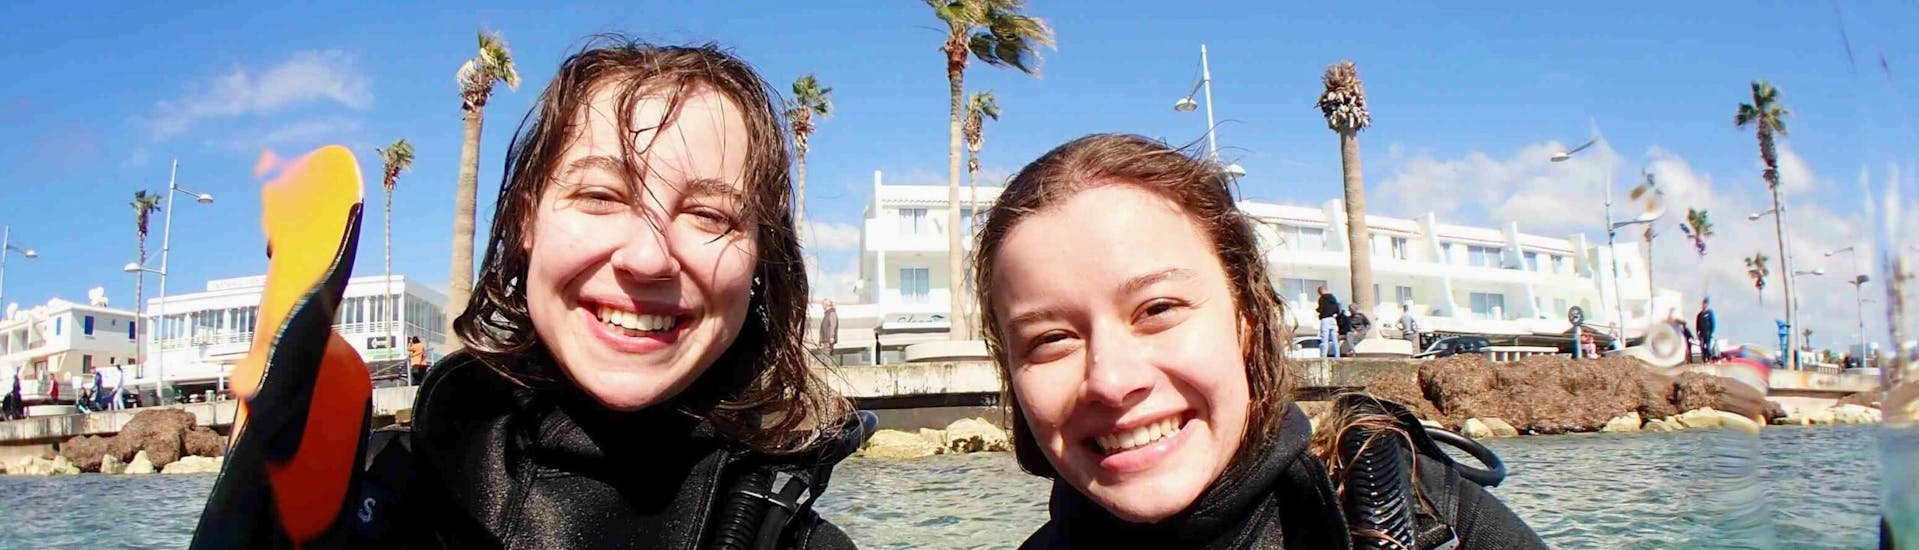 Girls are doing a PADI Scuba Diver Course in Paphos in Cyprus for Beginners with Cydive Paphos.